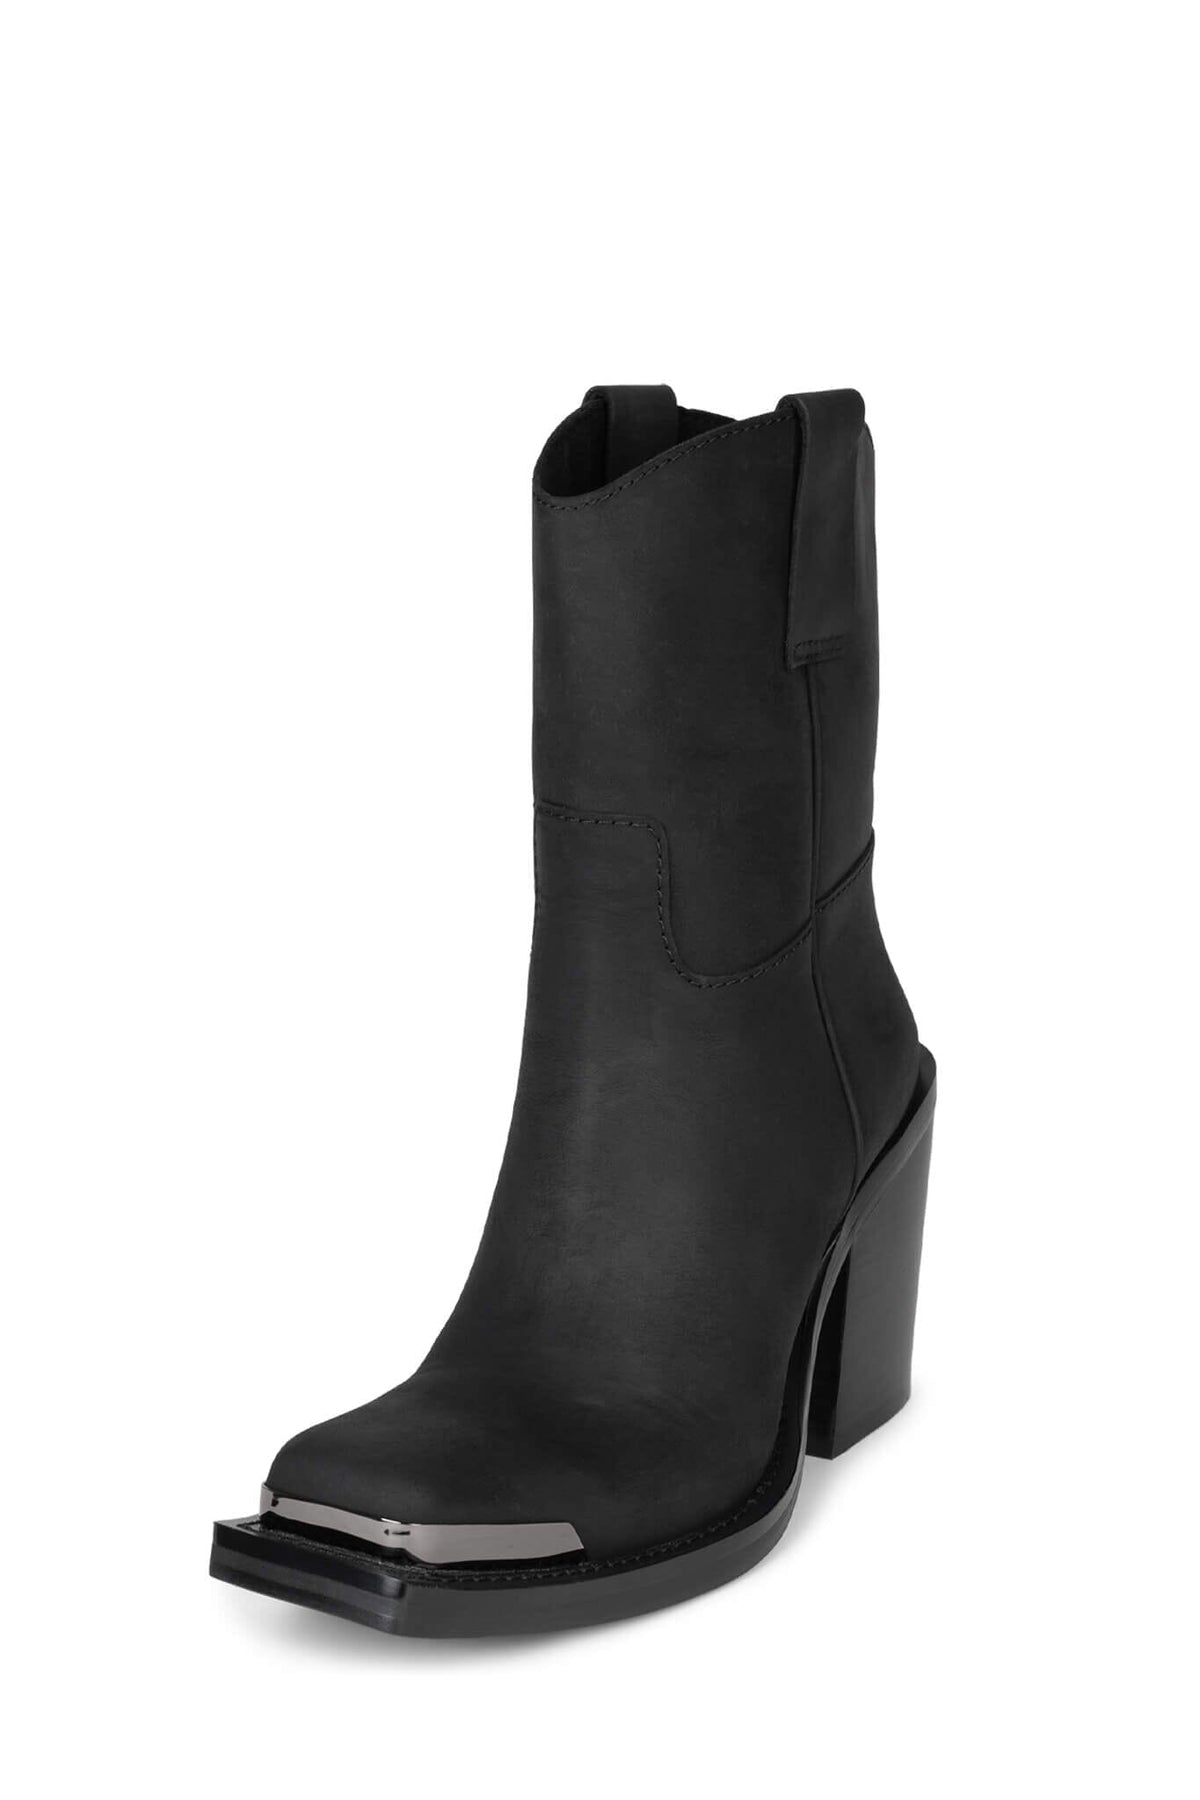 MYSTERIA Jeffrey Campbell Western Inspired Boots Black